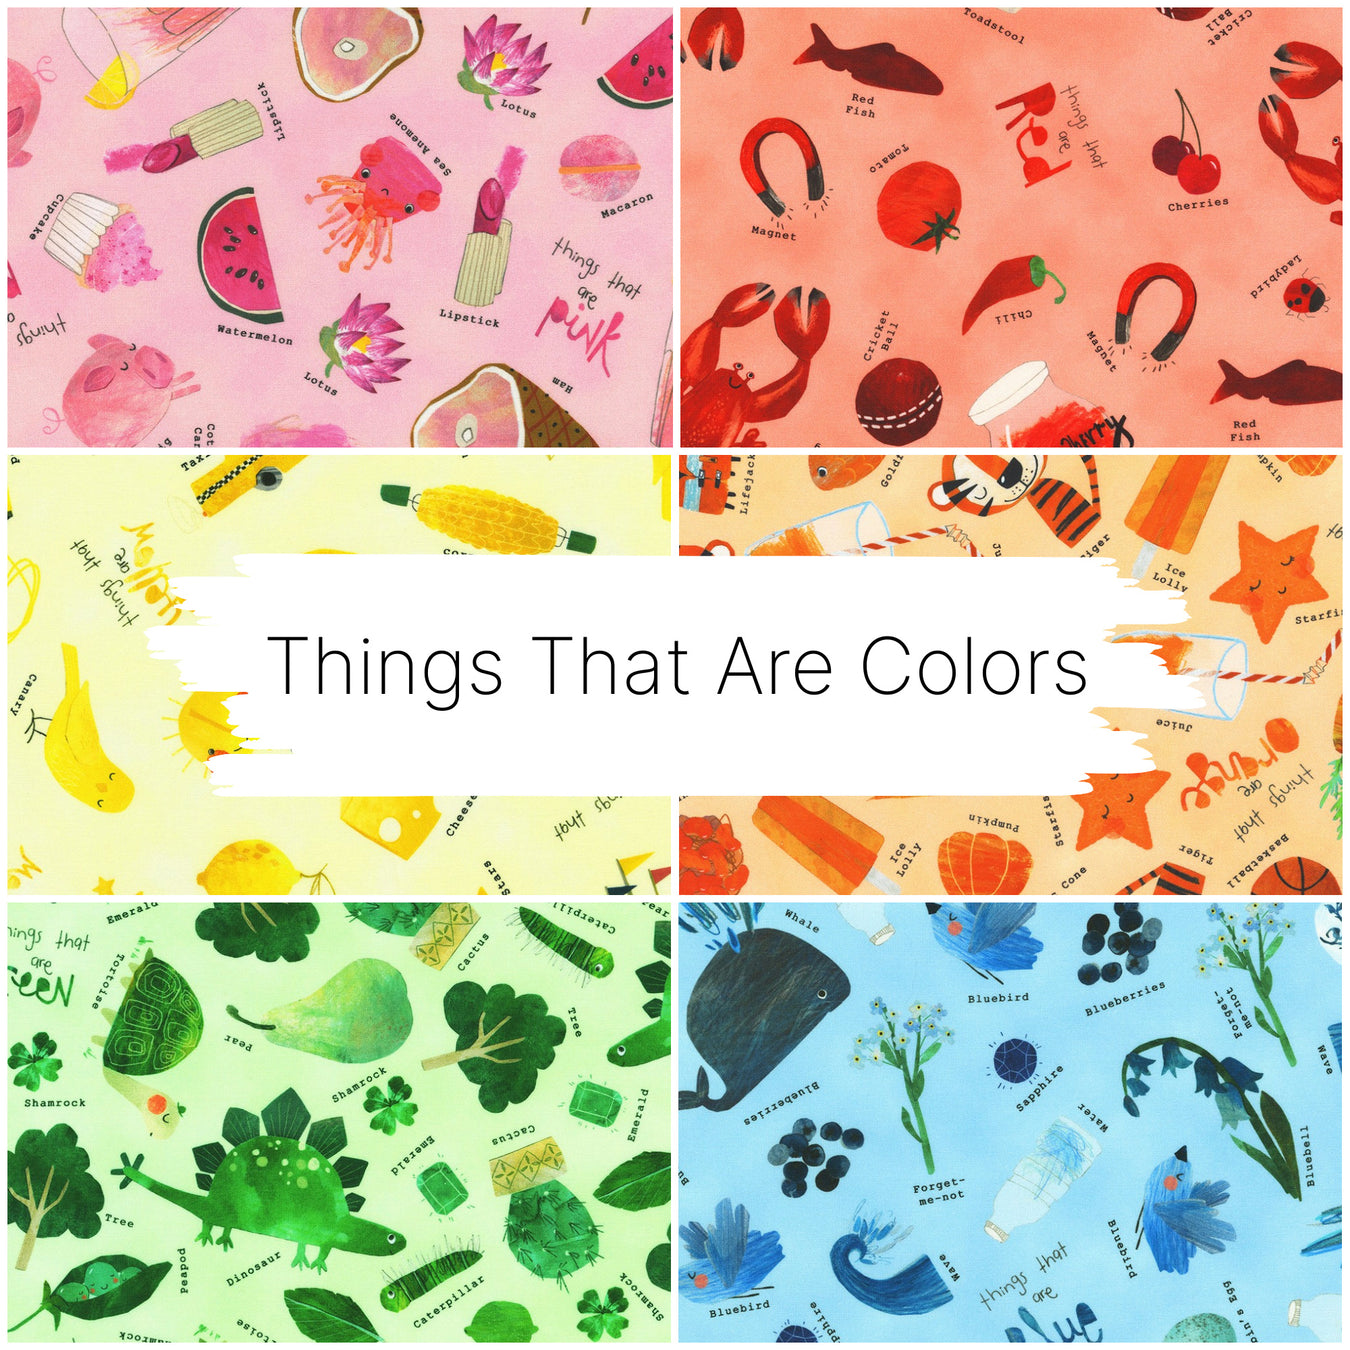 Things That Are Colors